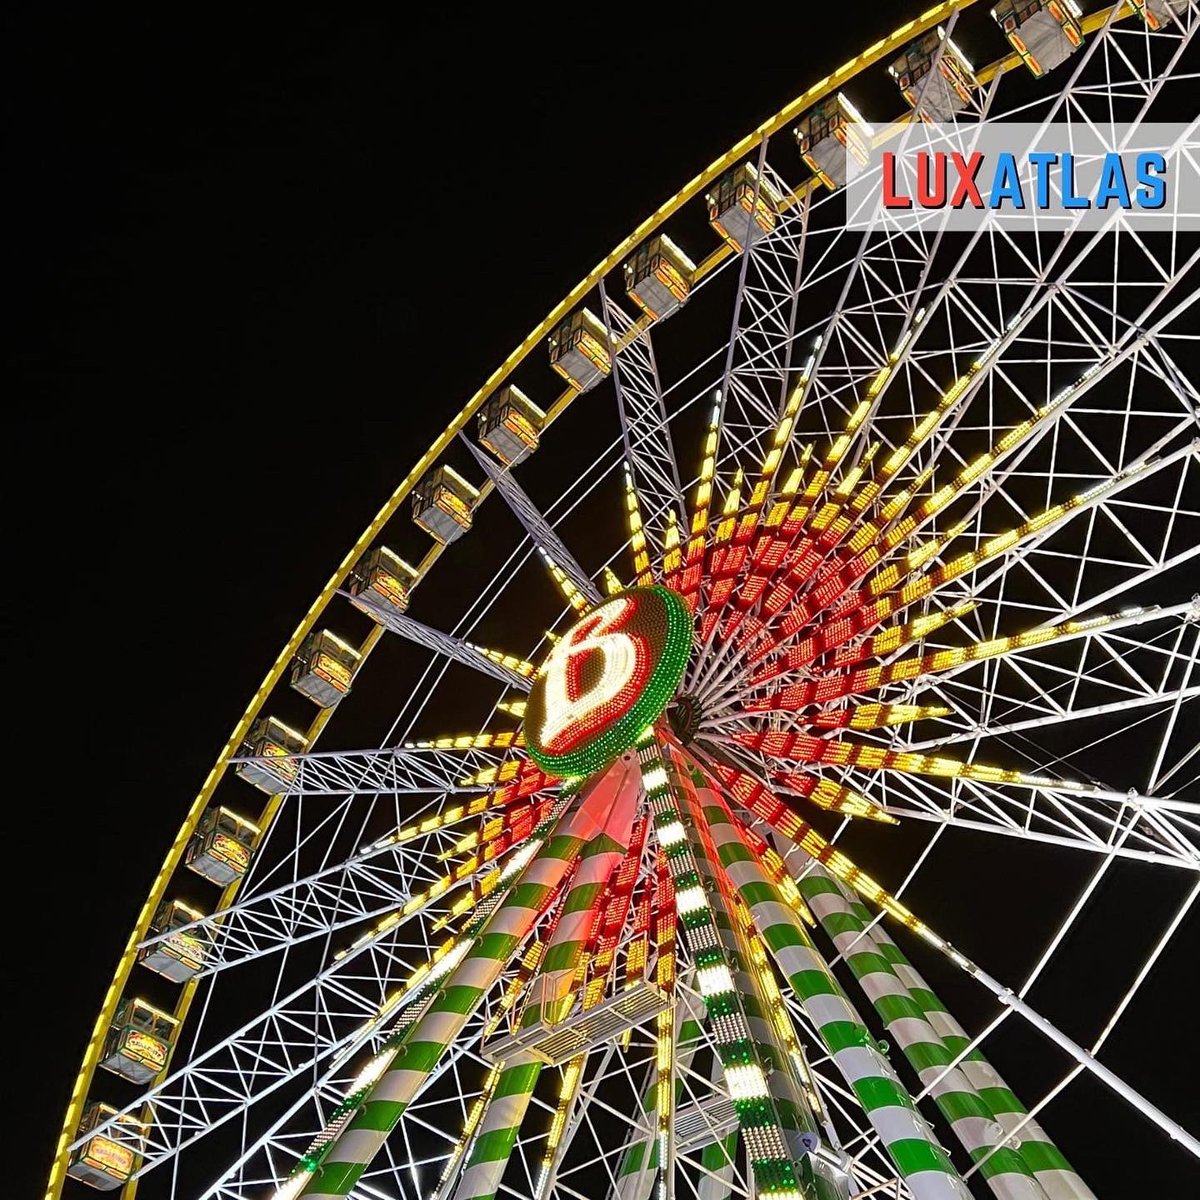 Did you know? Initially, the Schueberfouer took place on the Schuedbierg (today's Plateau Sait-Esprit), before moving to the Limpertsberg in 1610 and finally finding its present location on the Glacis in the early 19th century 🧐
👉 luxatlas.lu